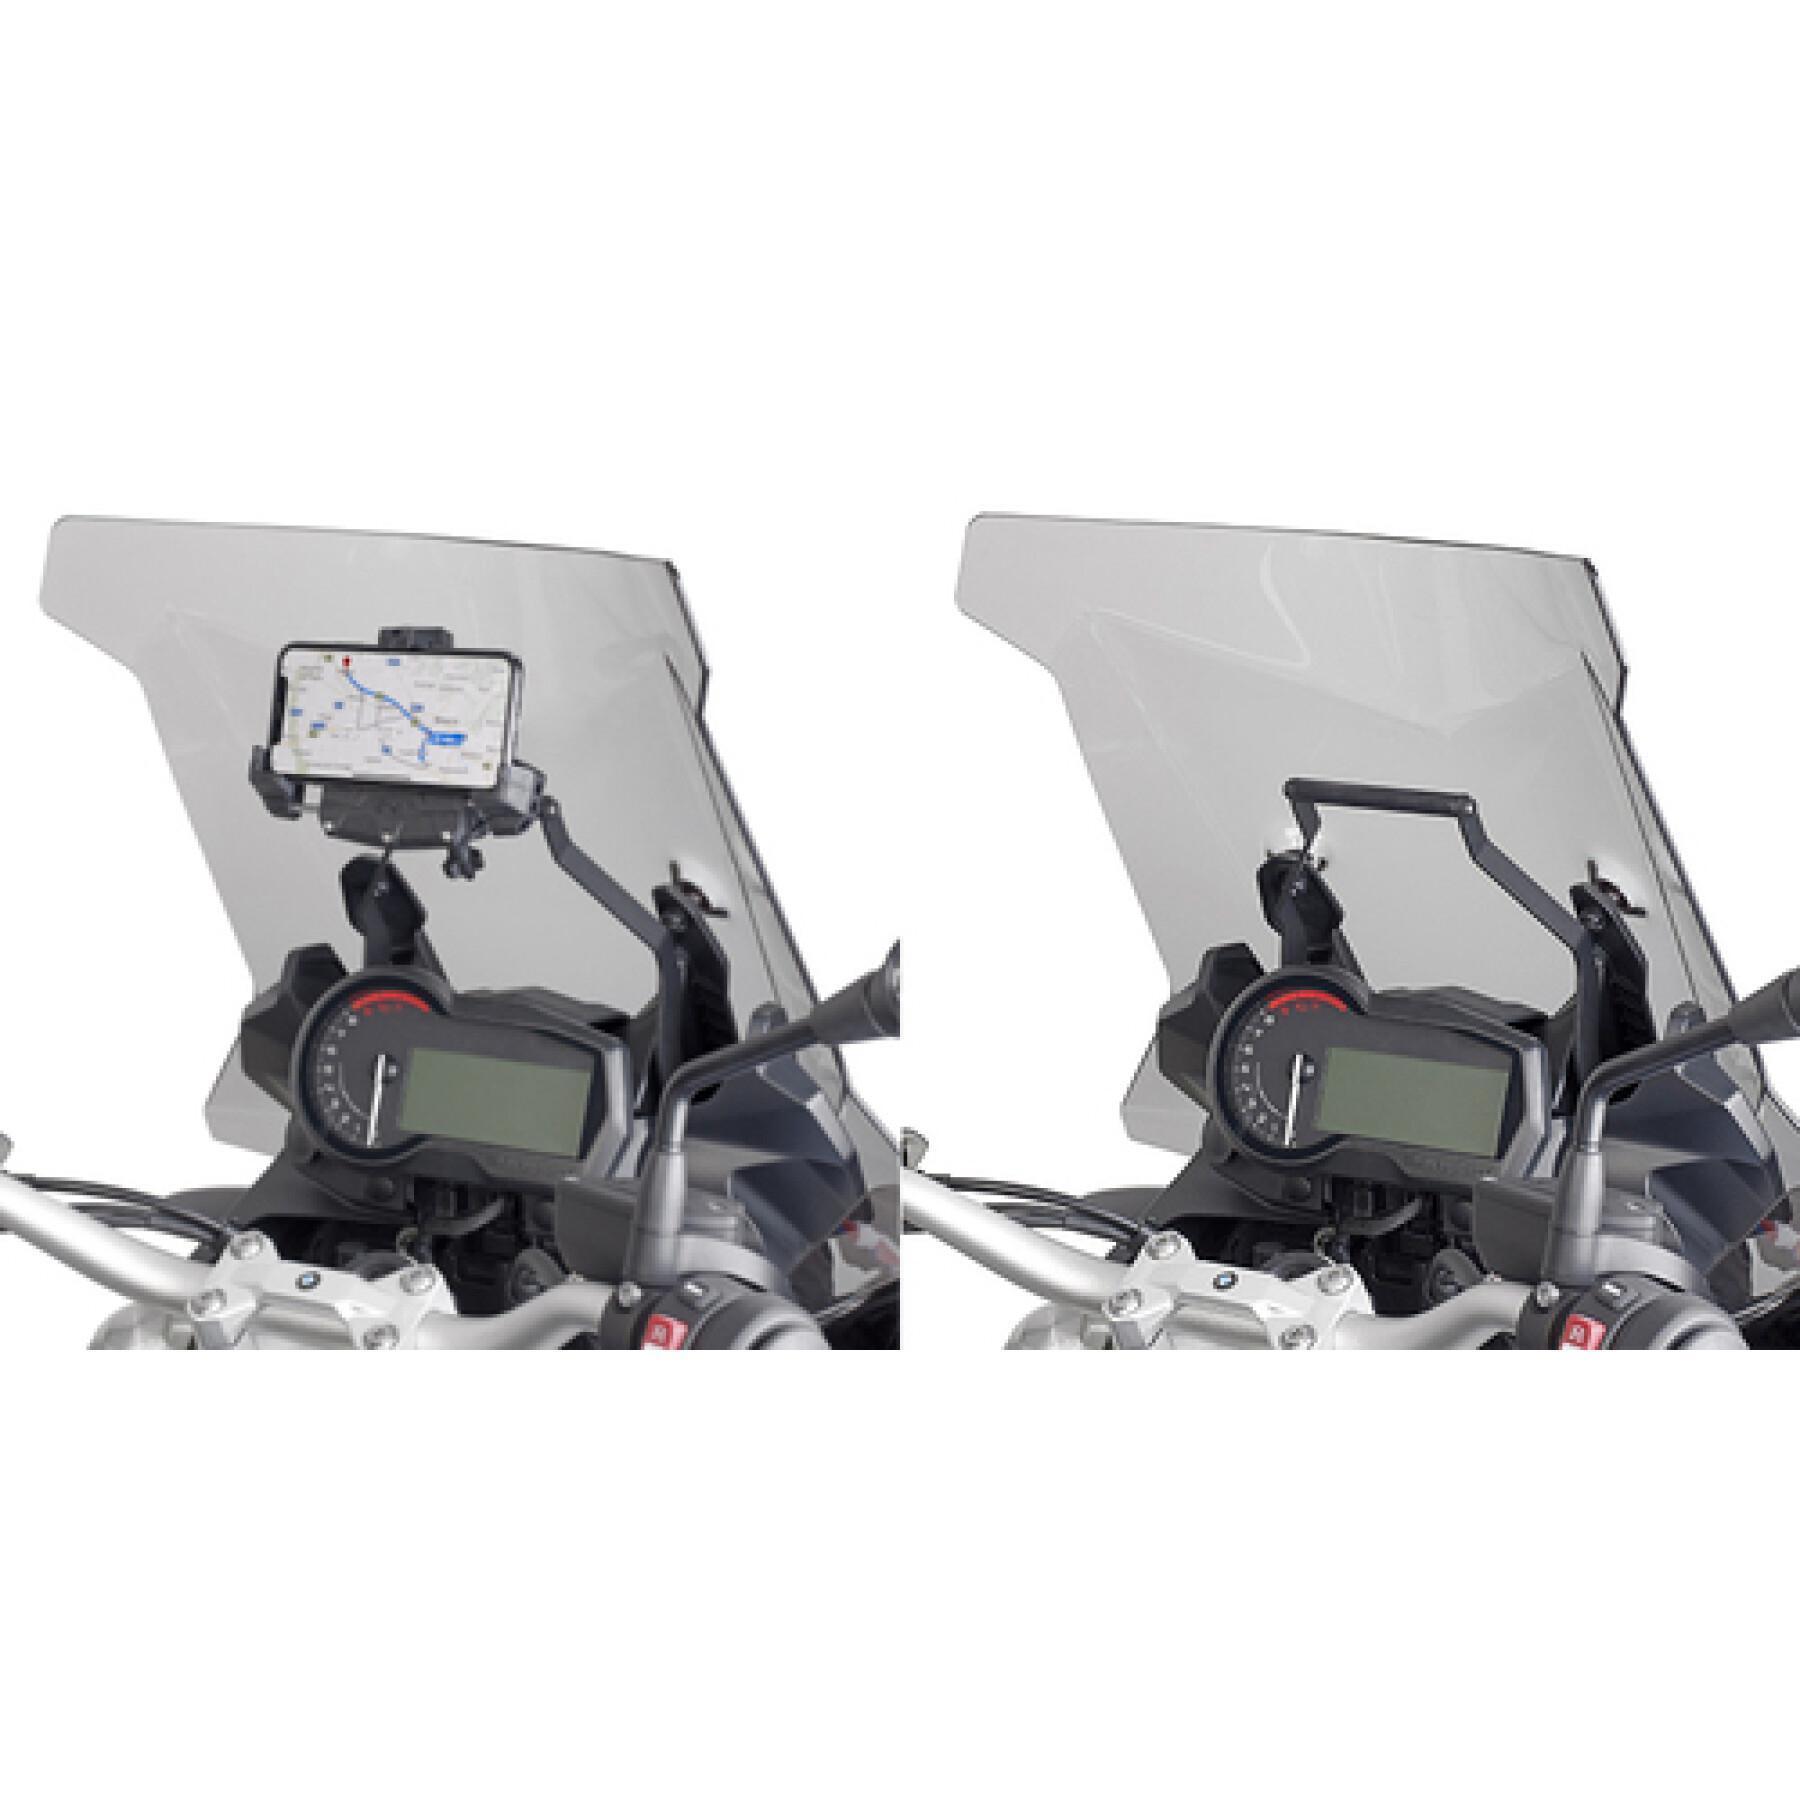 Châssis support GPS Givi Honda forza 750 21